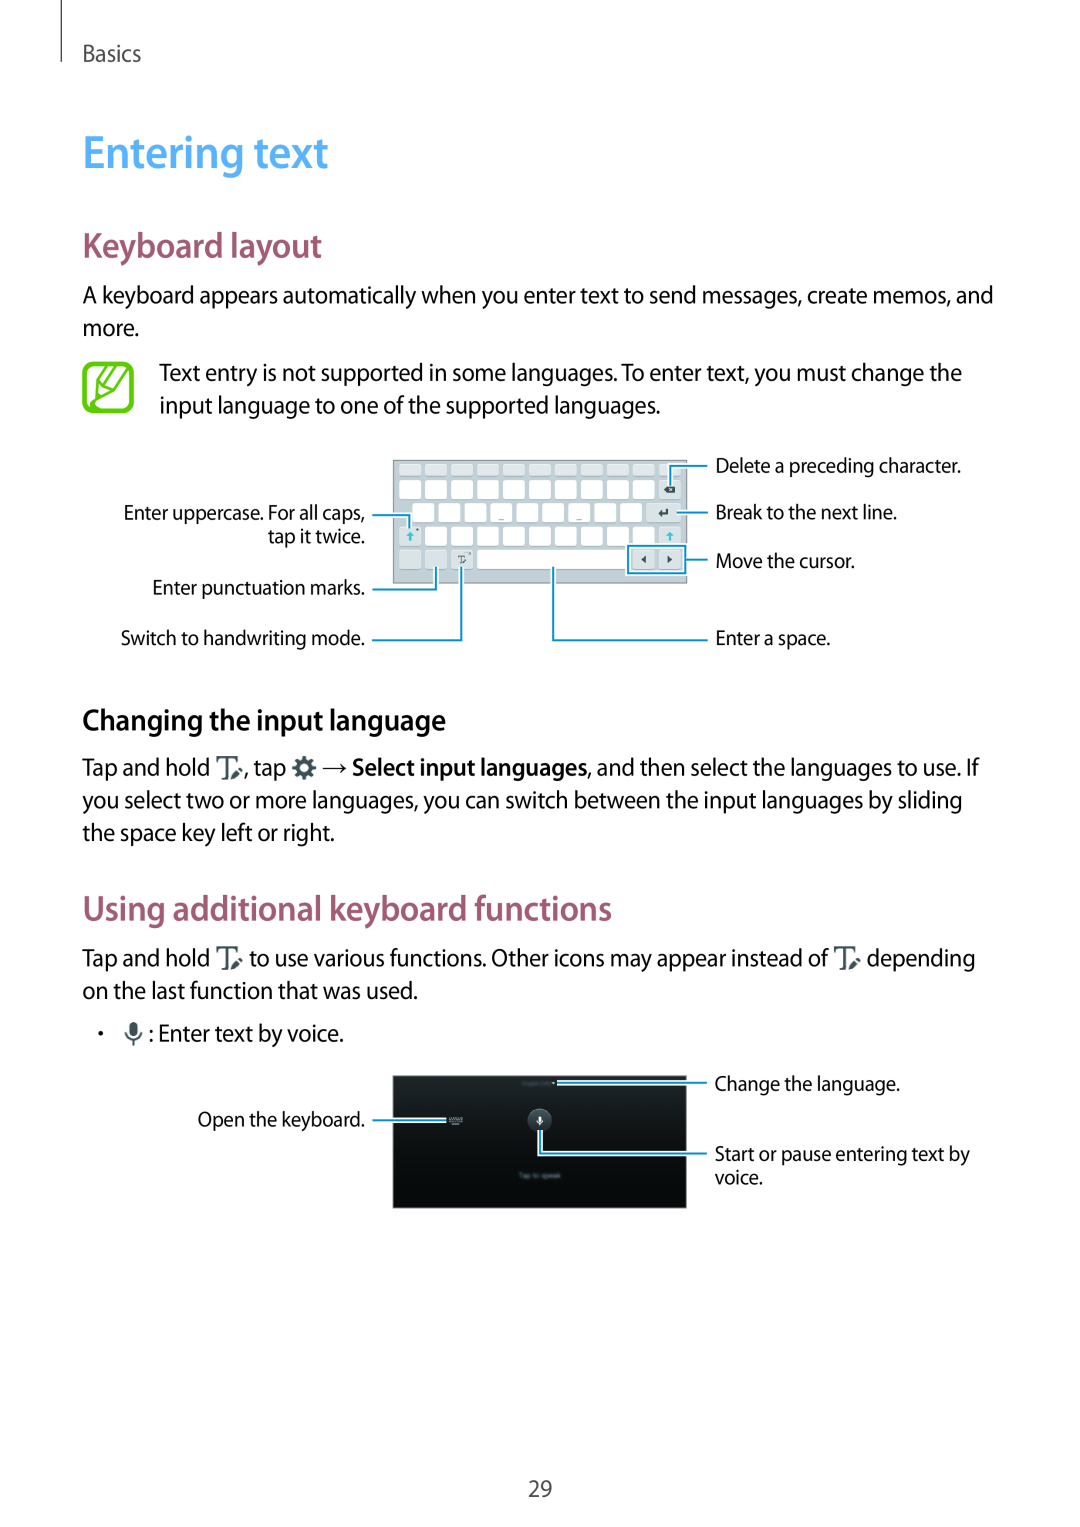 Samsung SM-P550NZAAXAR Entering text, Keyboard layout, Using additional keyboard functions, Changing the input language 